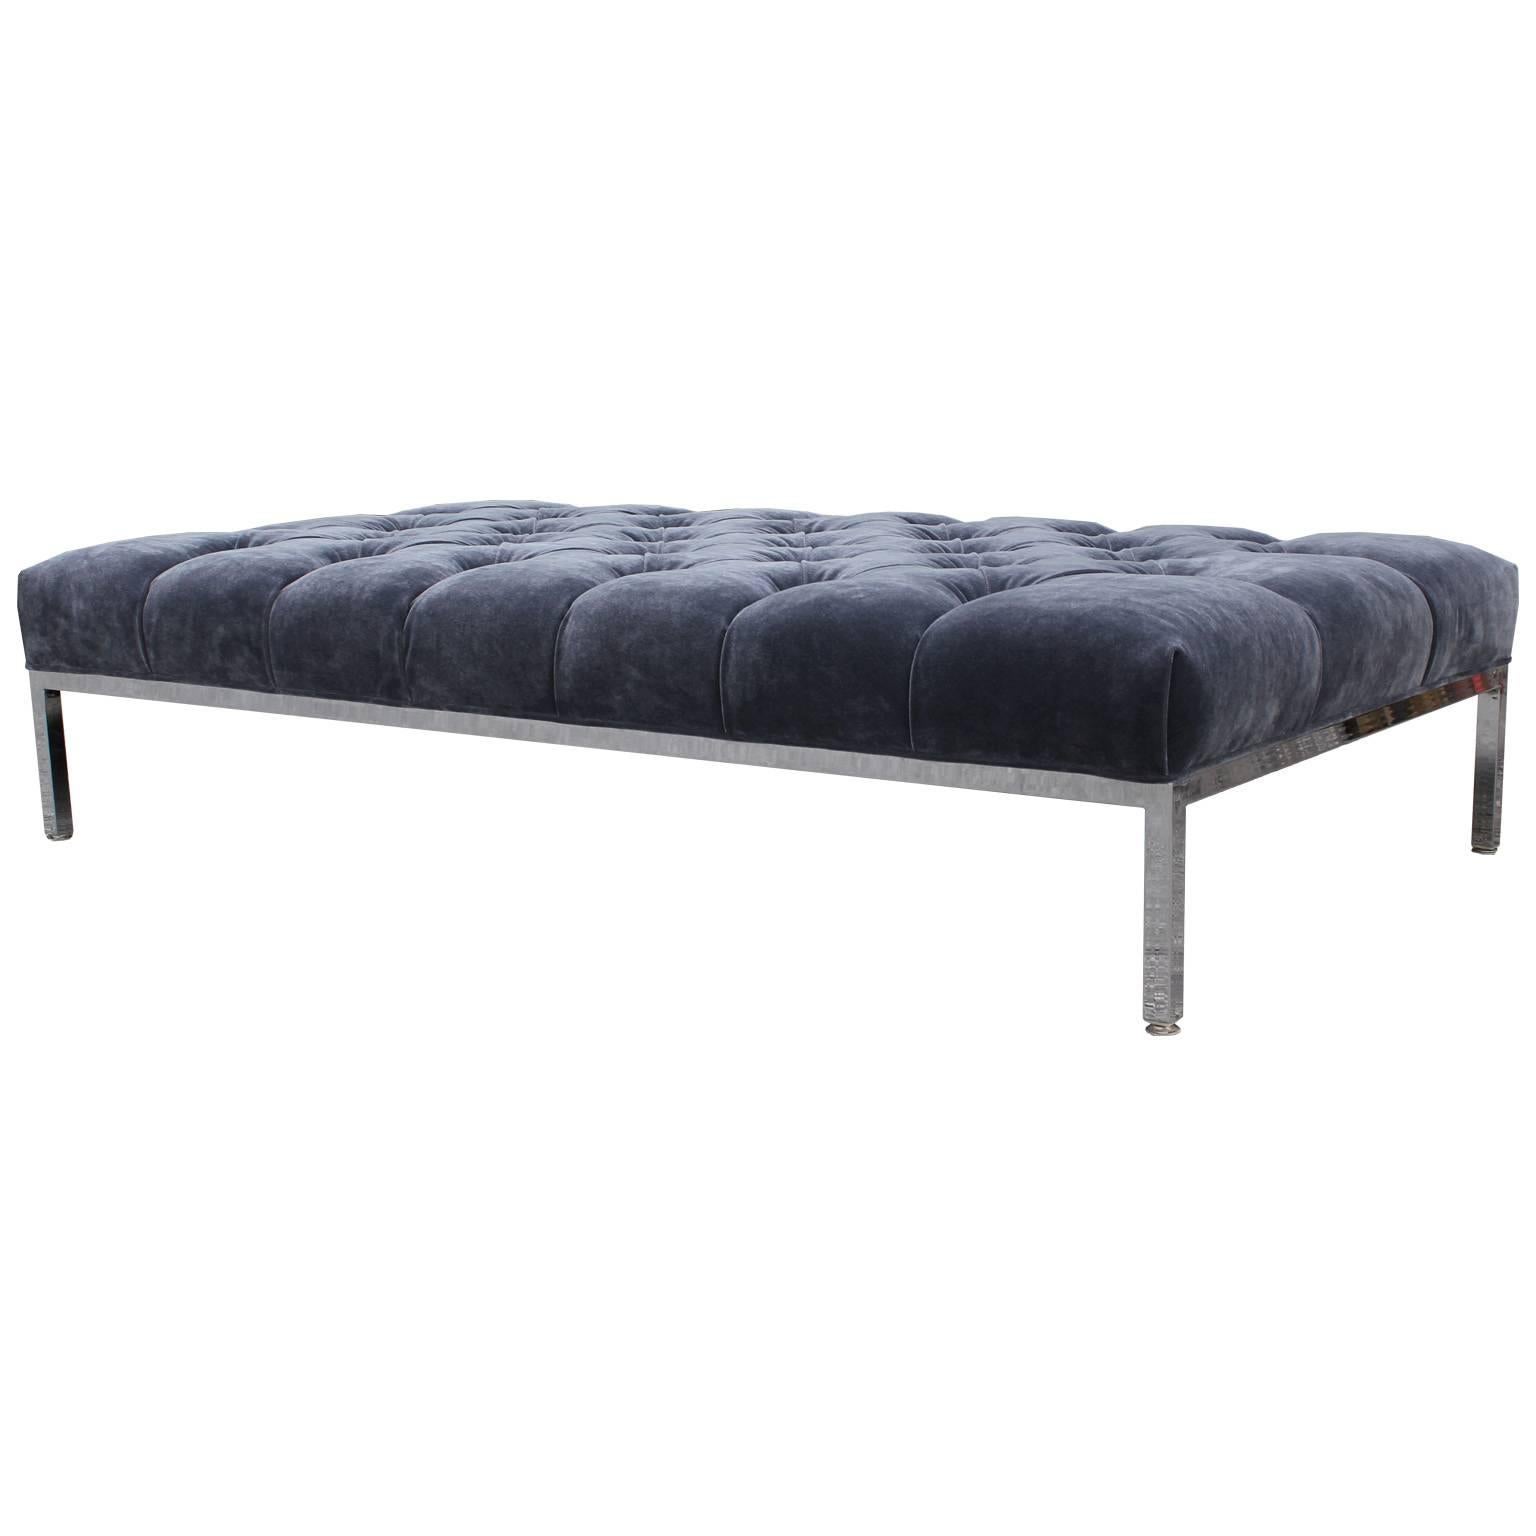 Fabulous ottoman, bench or coffee table freshly upholstered in a deeply tufted grey velvet. A clean lined Zographos style chrome base. Perfect used a coffee table. In excellent restored condition.